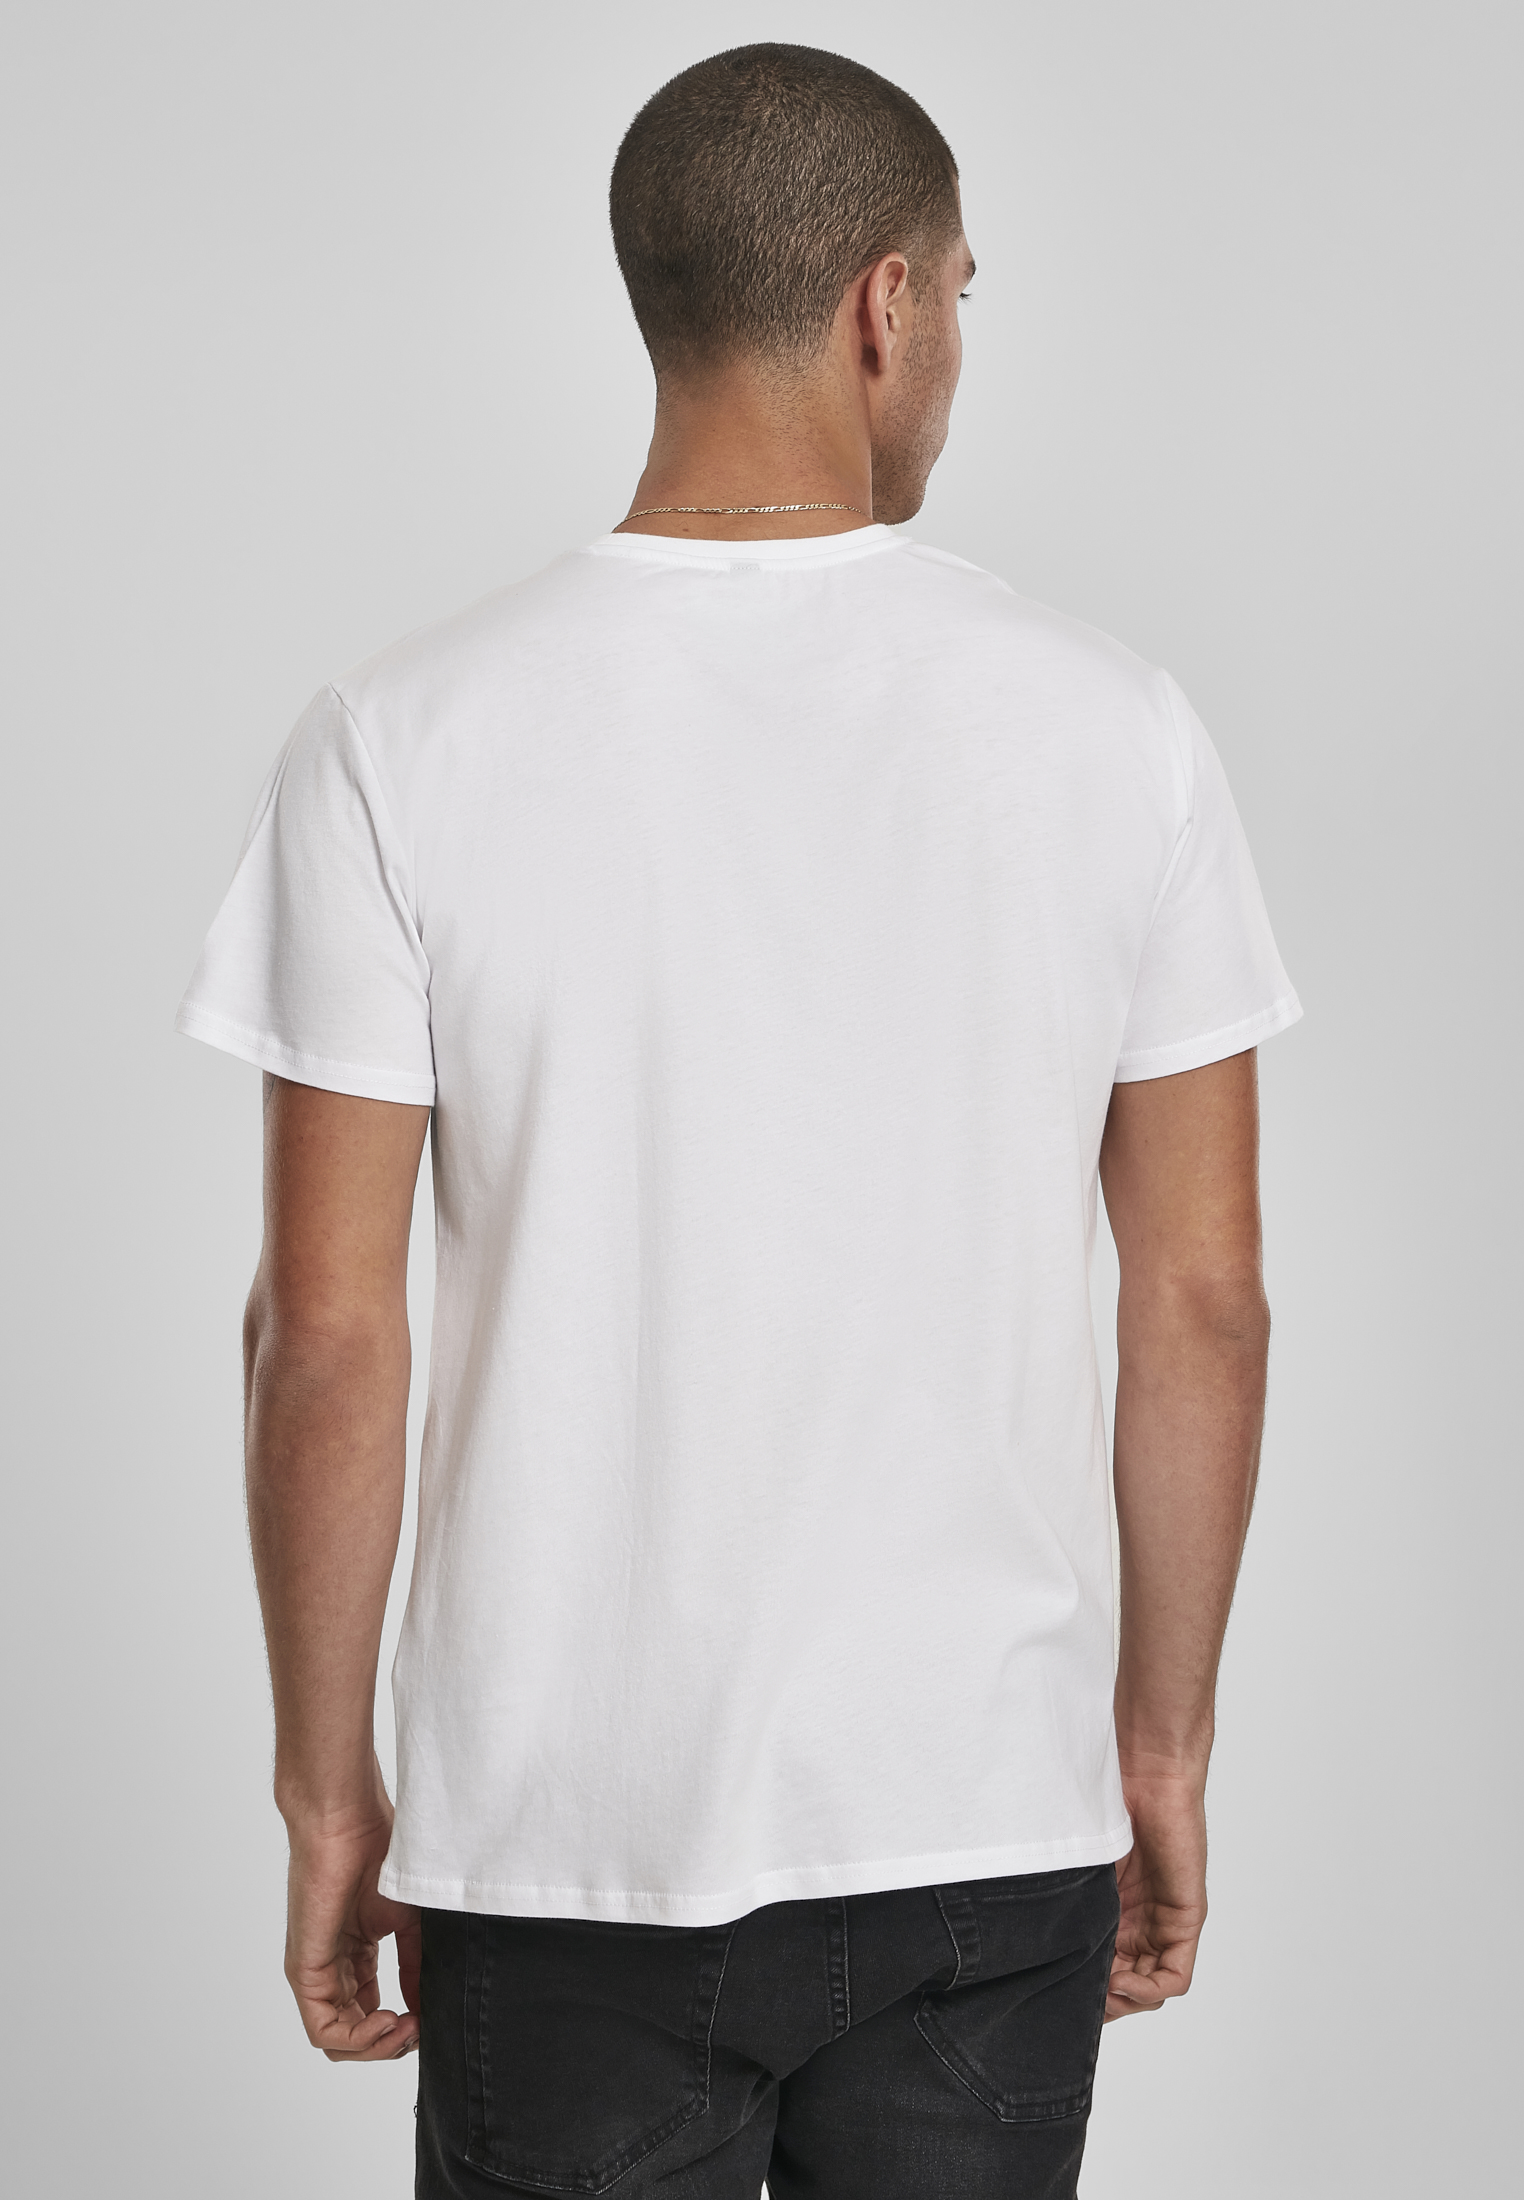 T-Shirts Marvel Logo Tee in Farbe white